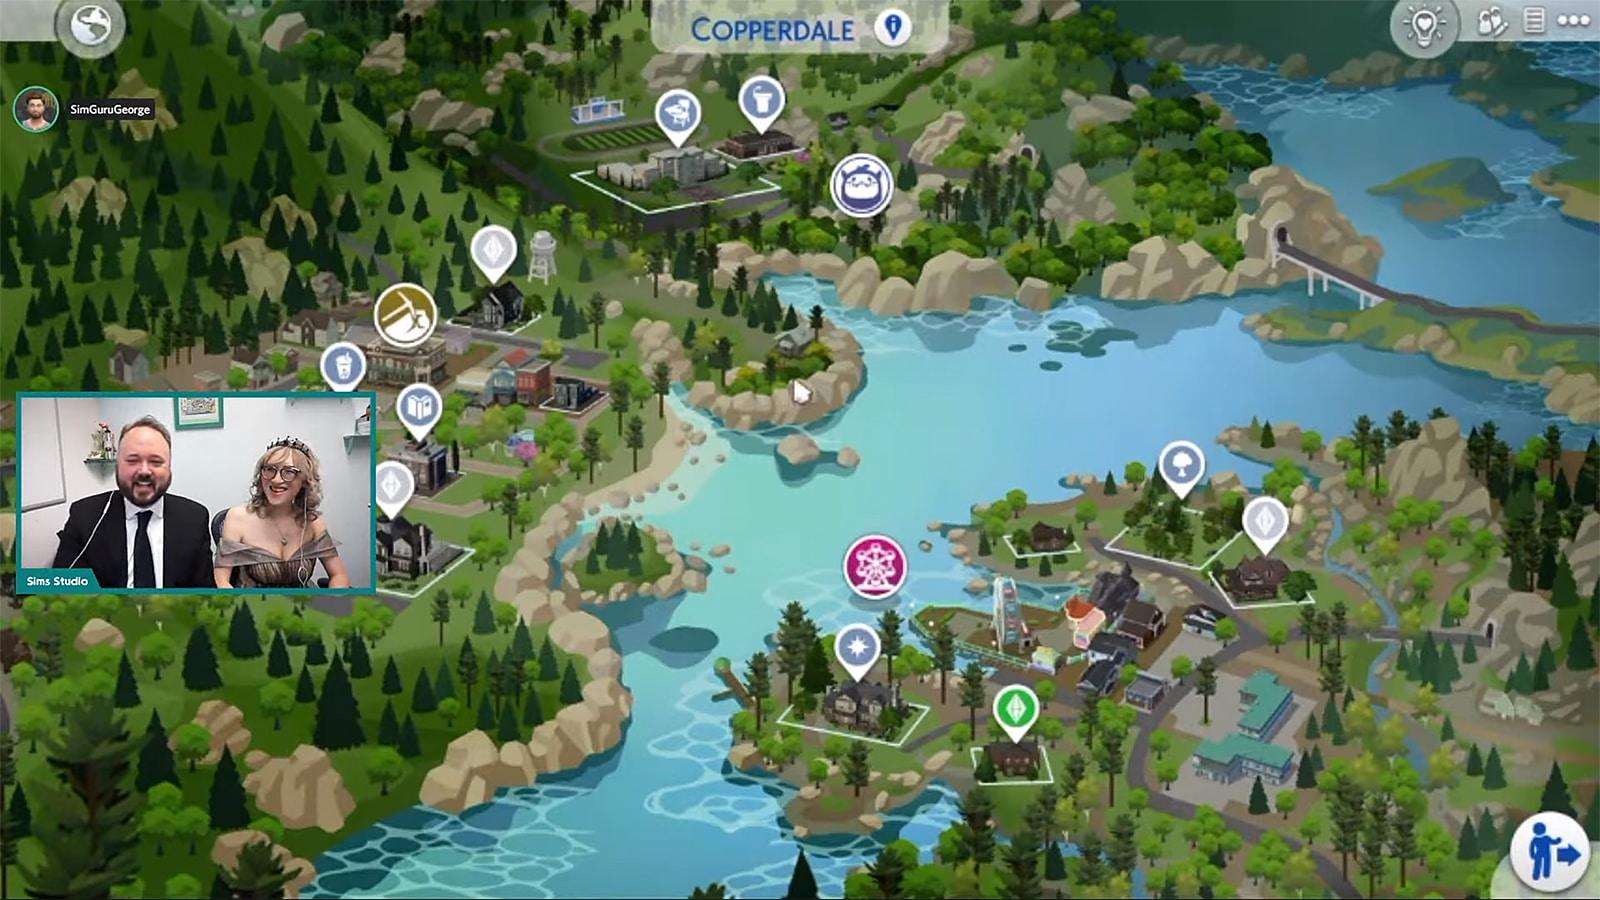 An image of the Copperdale world map in Sims 4 High School Years